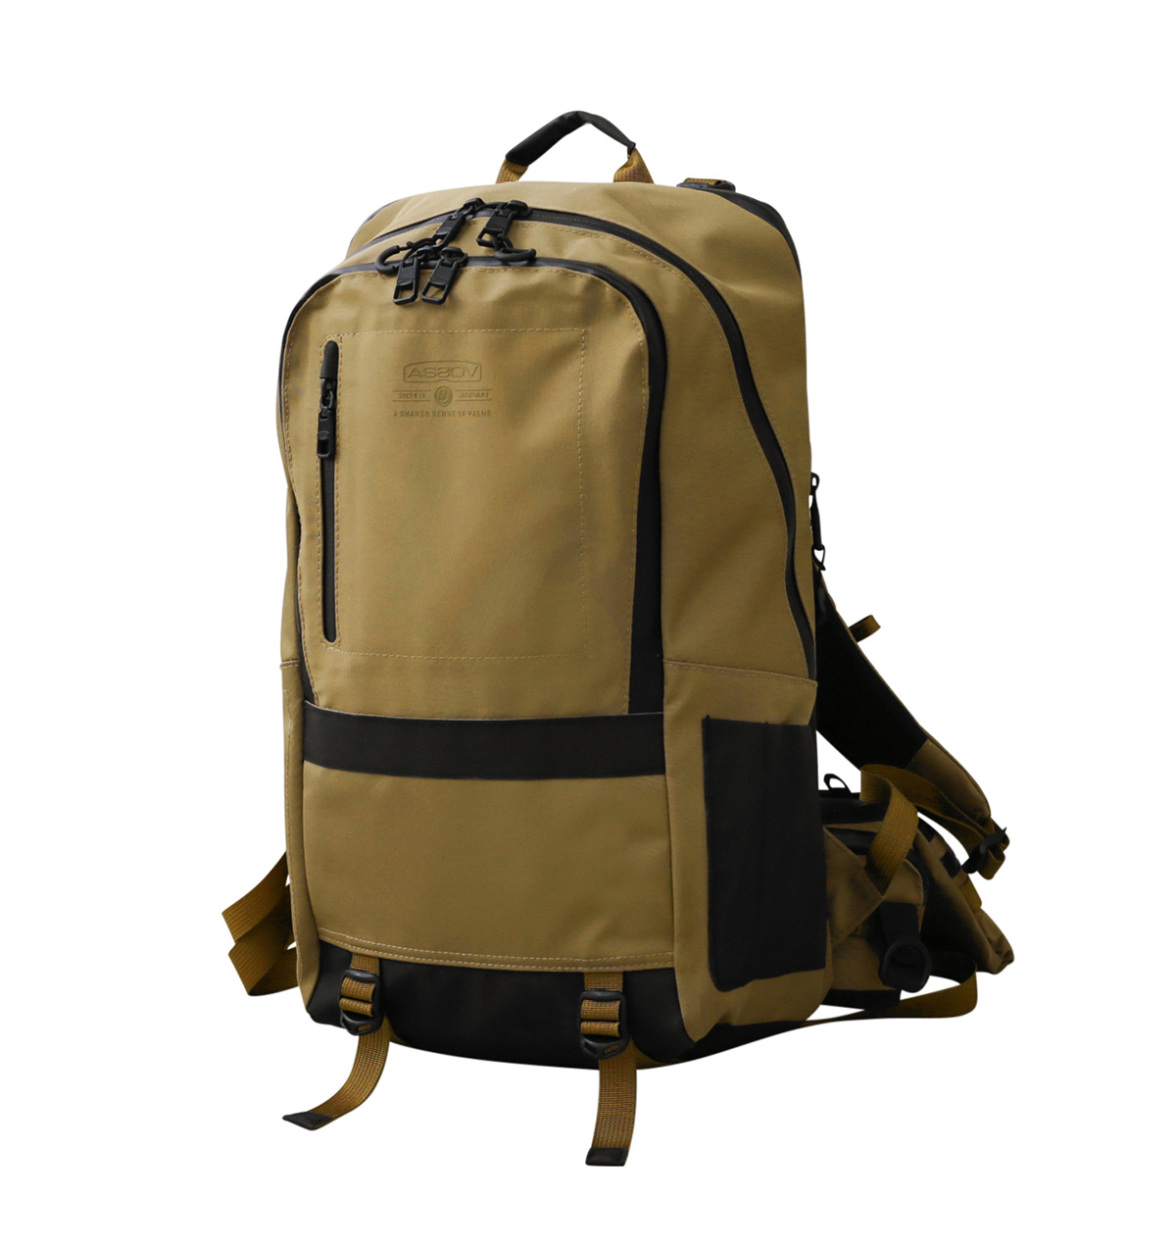 AS2OV 141600 WATER PROOF CORDURA 305D DAY PACK バック...